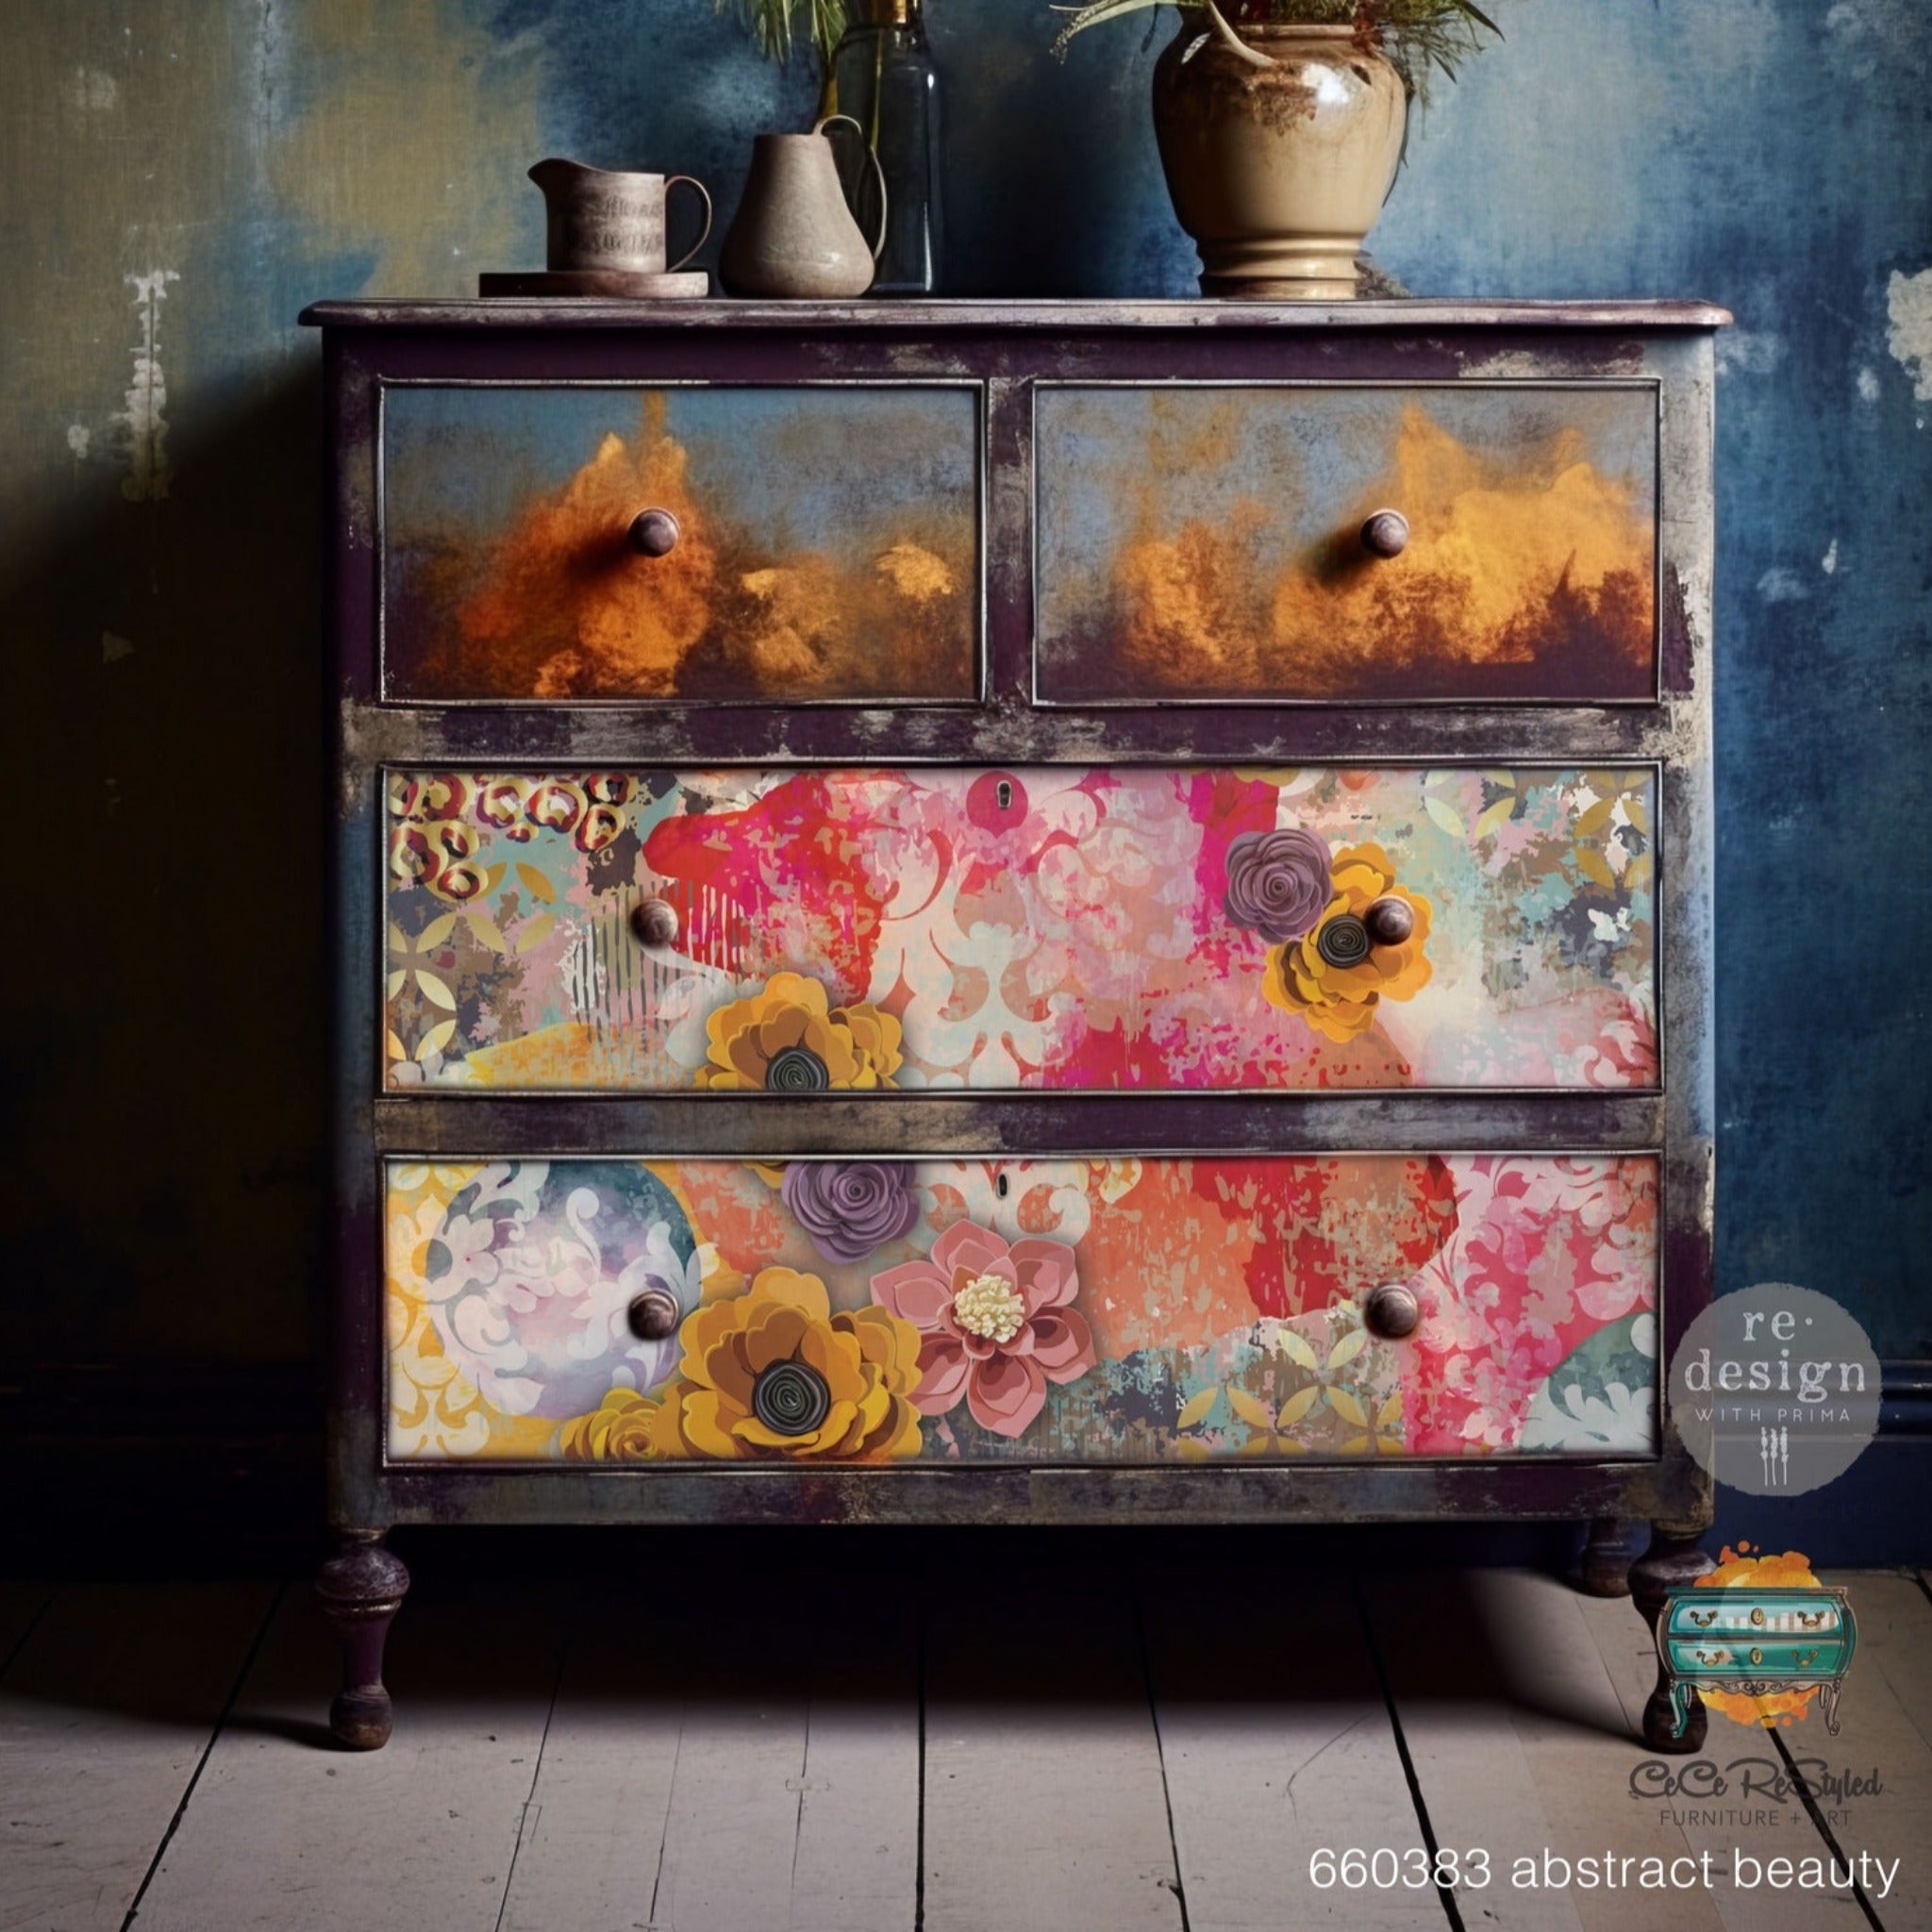 A vintage 4-drawer dresser refurbished by CeCe ReStyled is painted purple with blends of blue and rust orange and features ReDesign with Prima's Abstract Beauty tissue paper on the bottom 2 drawers.